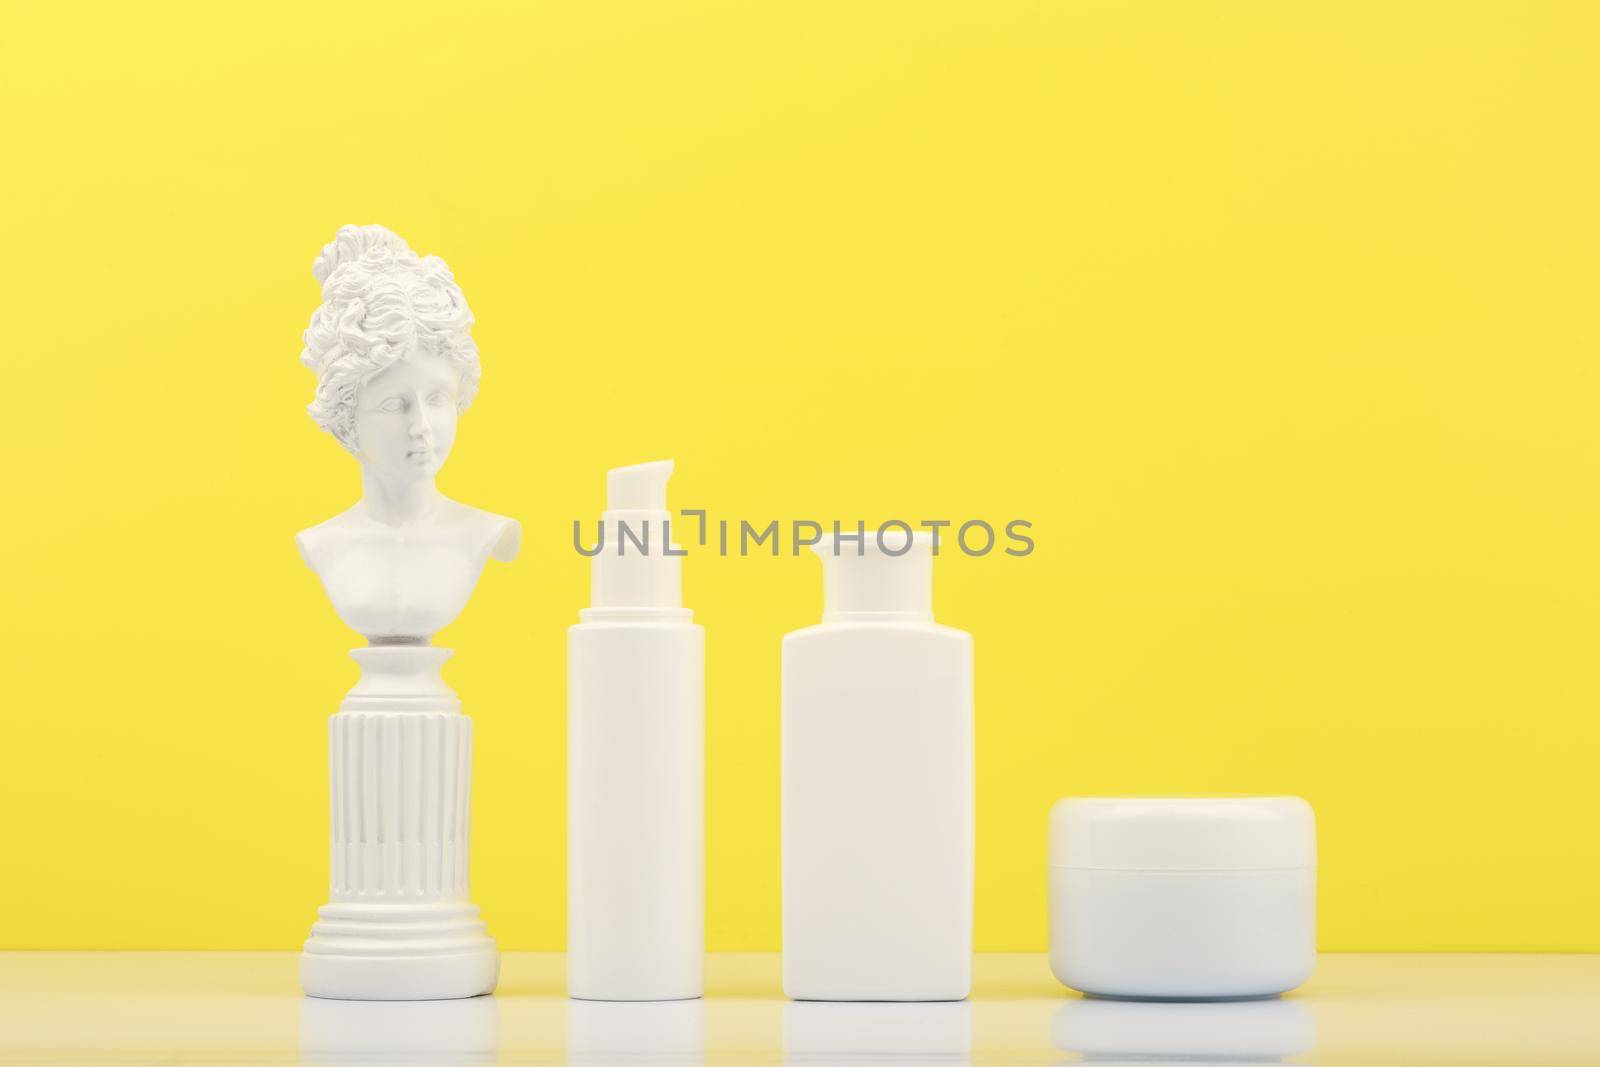 Set of beauty products for daily skin care on white table against bright yellow background with white gypsum statue. Unbranded cosmetic bottles for daily skin routine